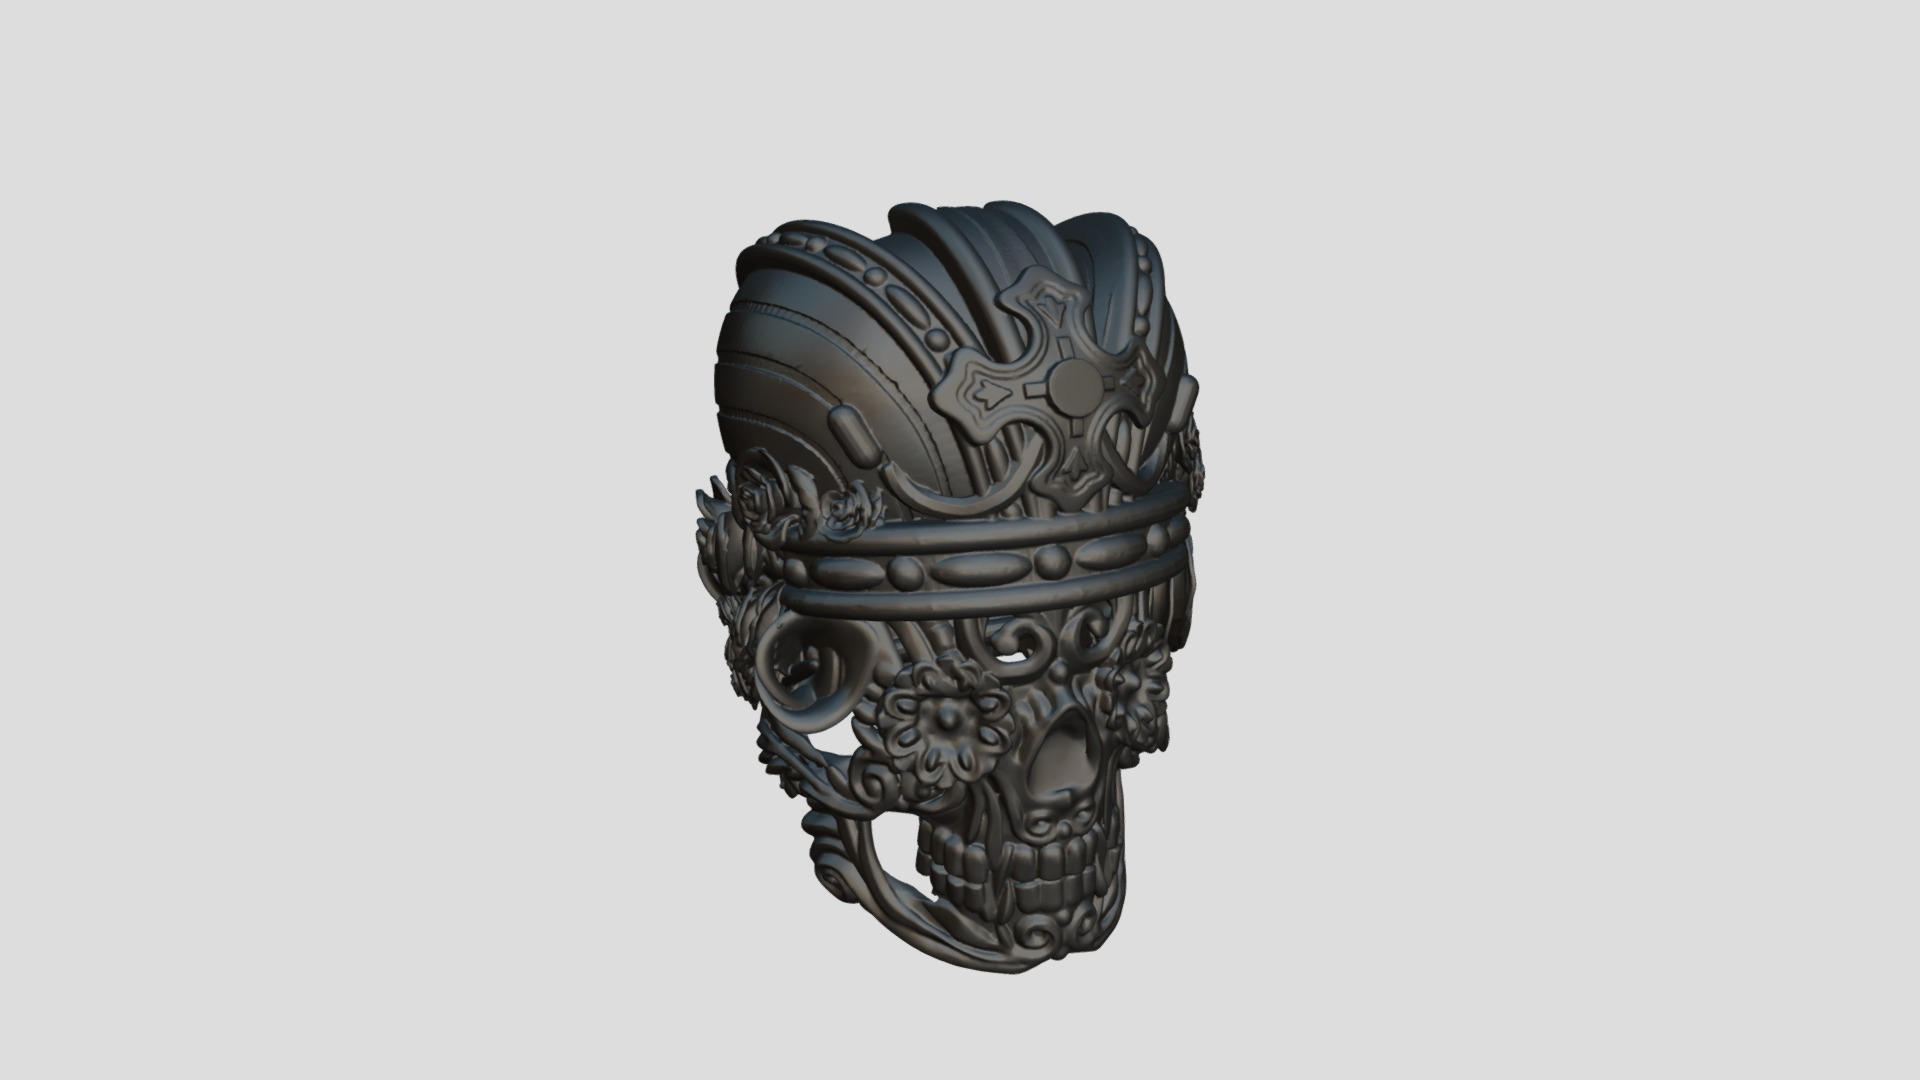 3D model Live To Ride Skull Ring - This is a 3D model of the Live To Ride Skull Ring. The 3D model is about a skull with a design.